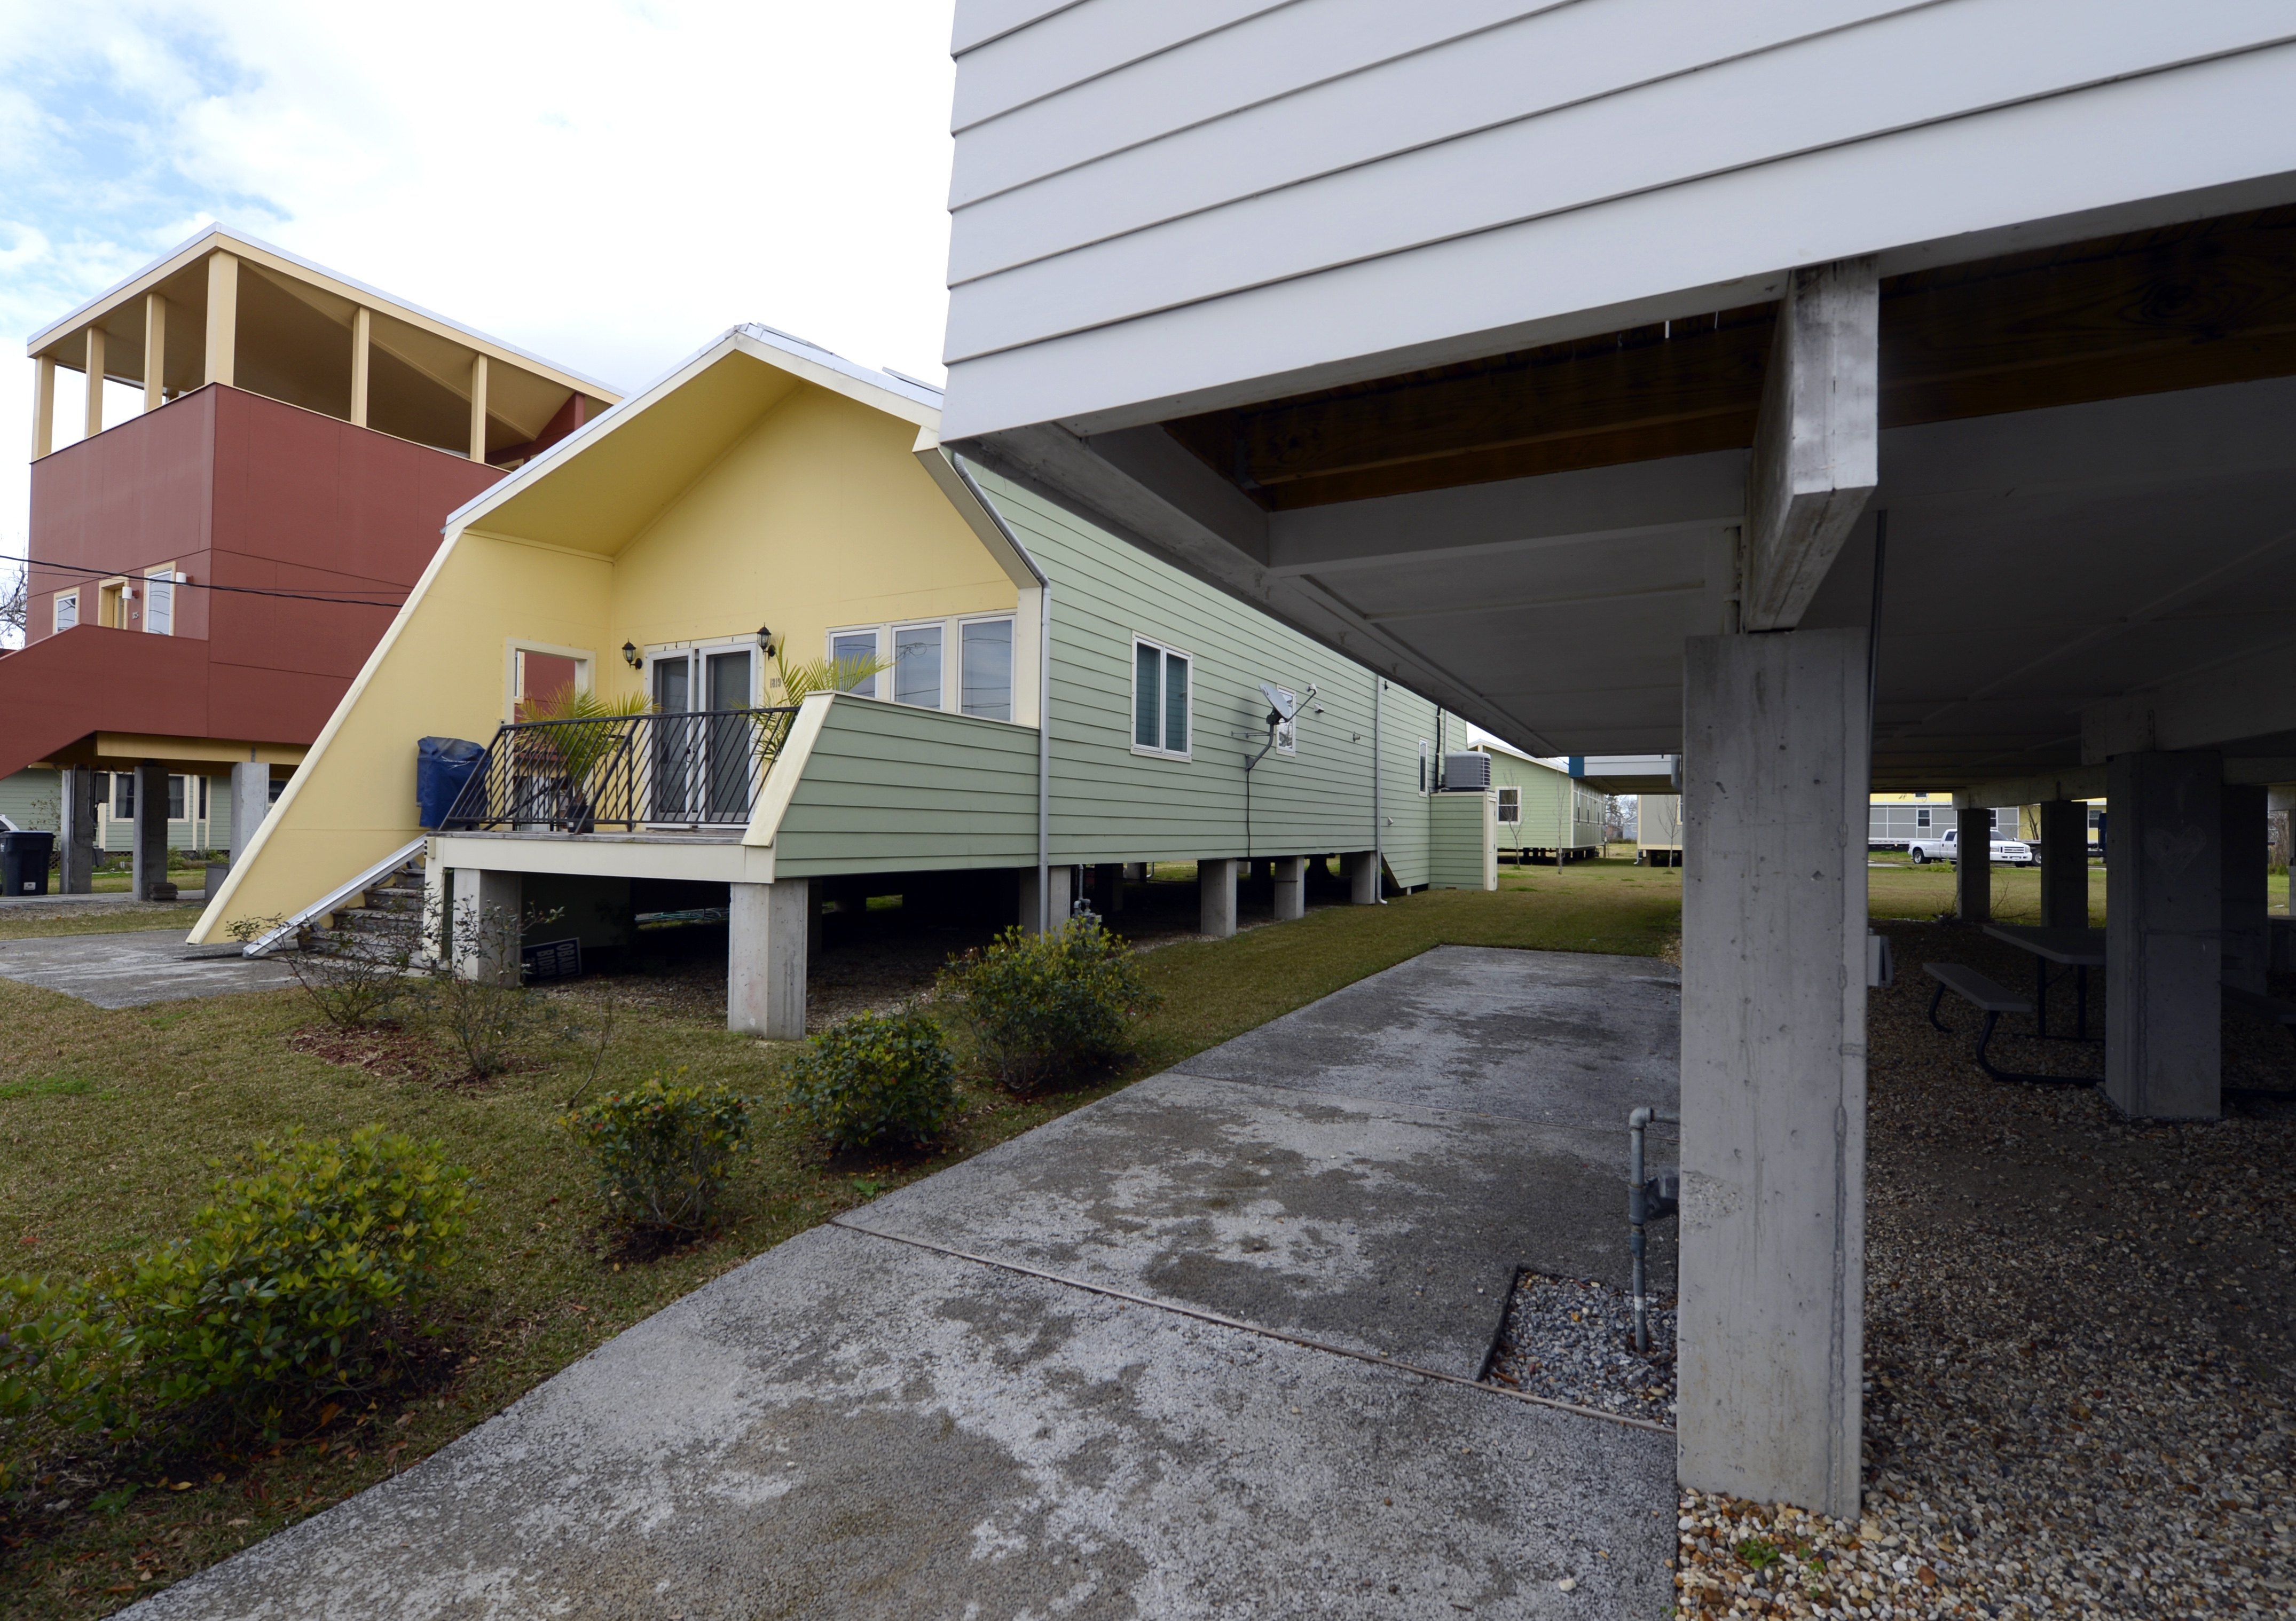 A yellow and green modern home sits in the Lower Ninth Ward.